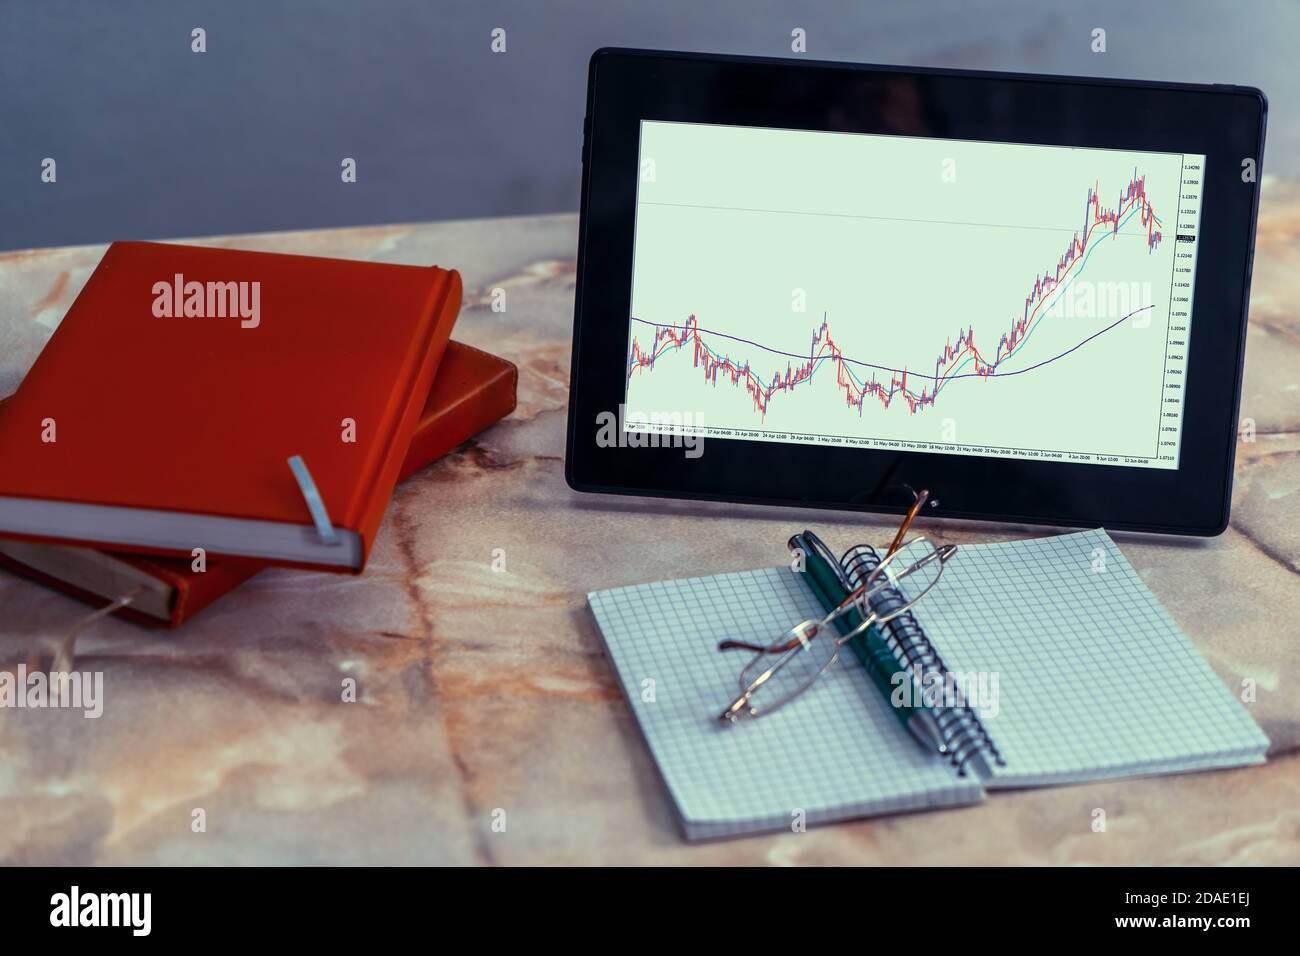 A tablet screen on a desk displaying a currency pairs chart. There are a notebooks, a pen and a glasses too. Stock Photo